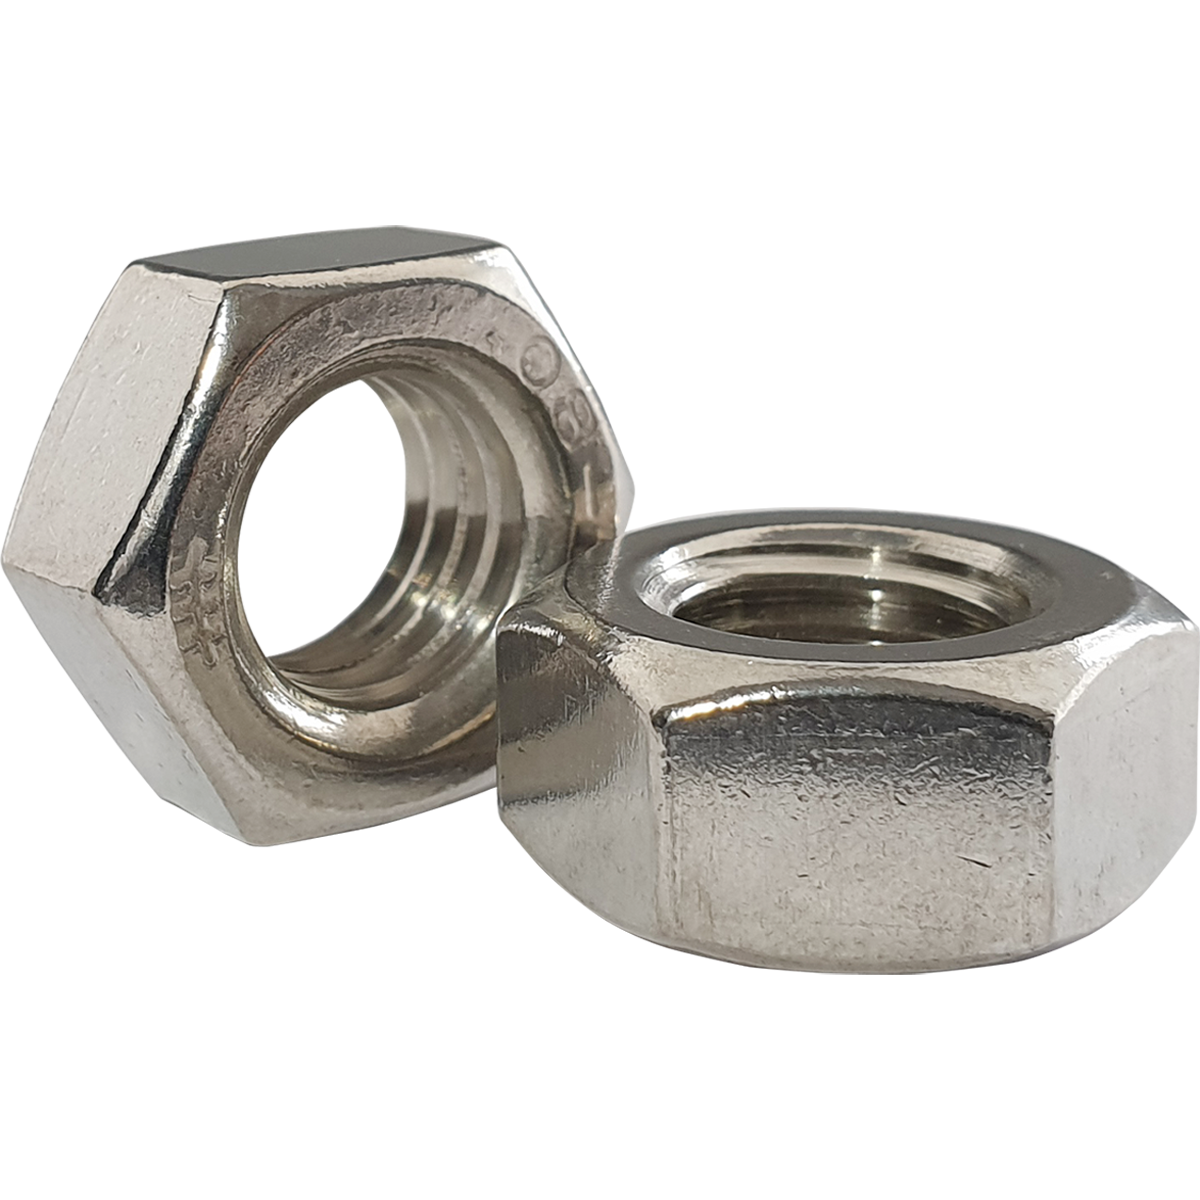 Hex nuts, also known as hexagonal nuts are manufactured from various materials and all at competitive prices here at Fusion Fixings